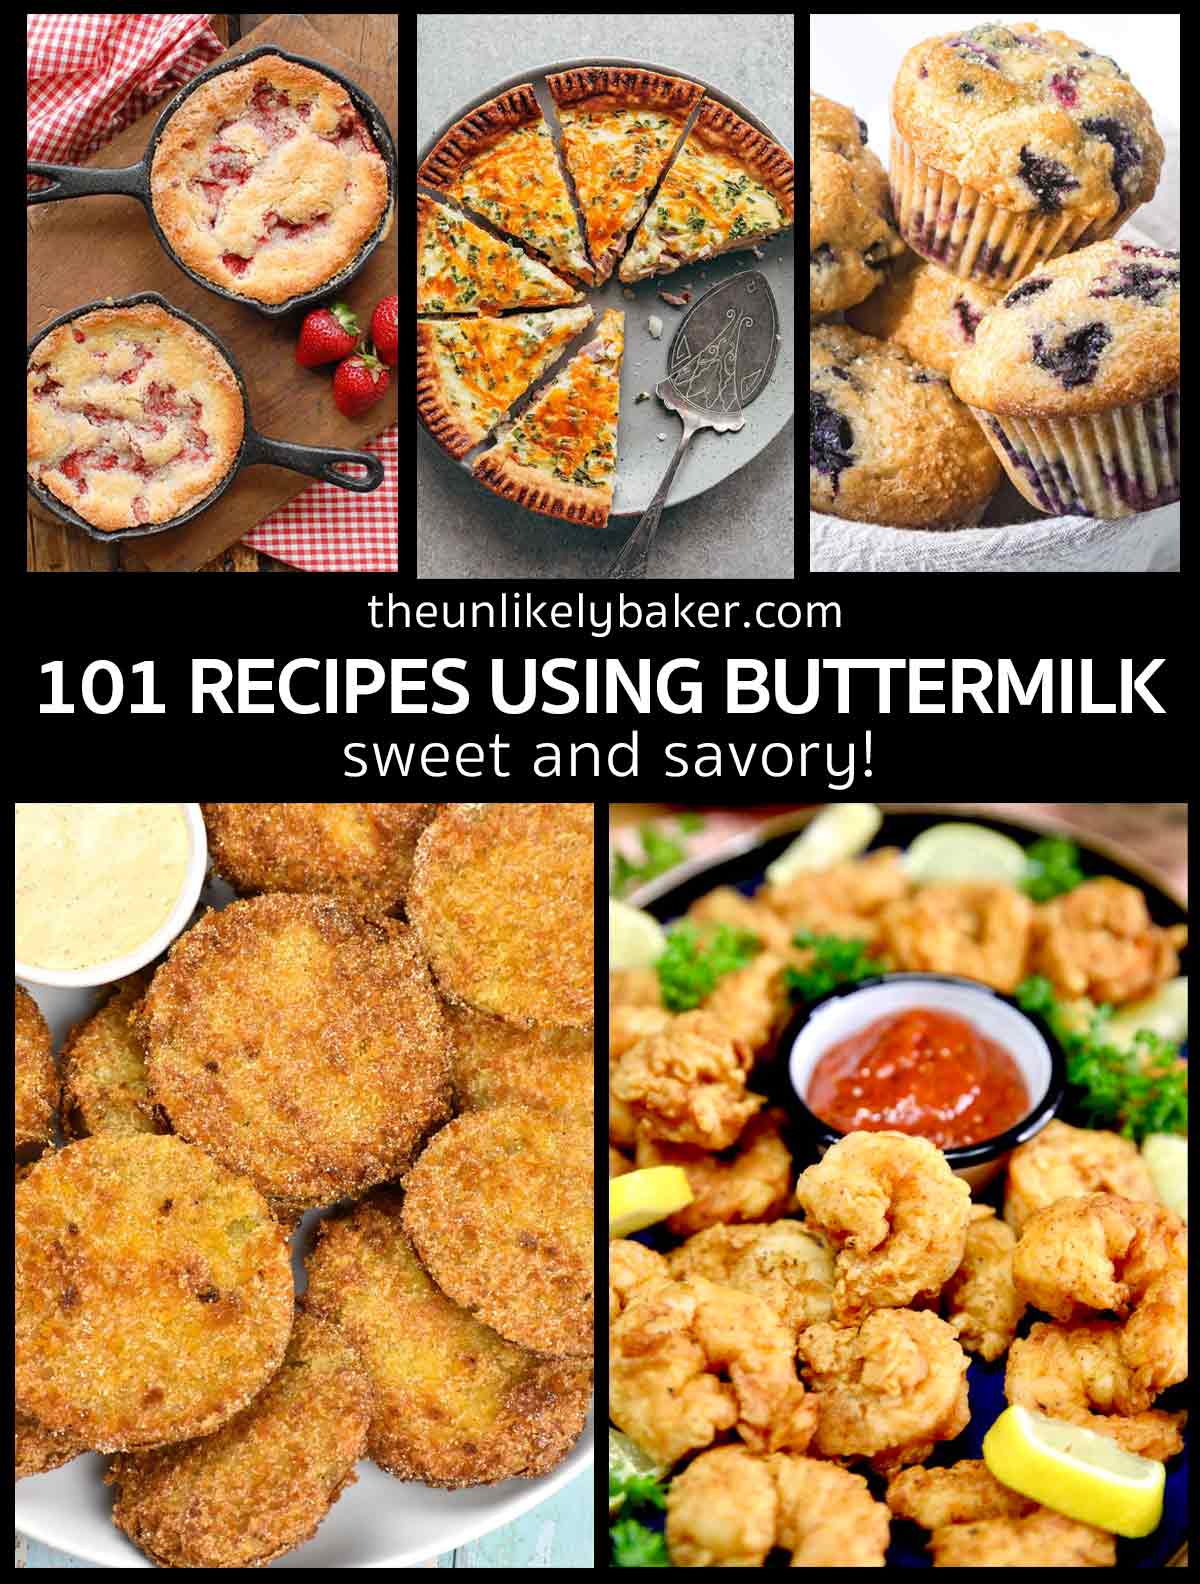 Collage of dishes made with buttermilk with text overlay.